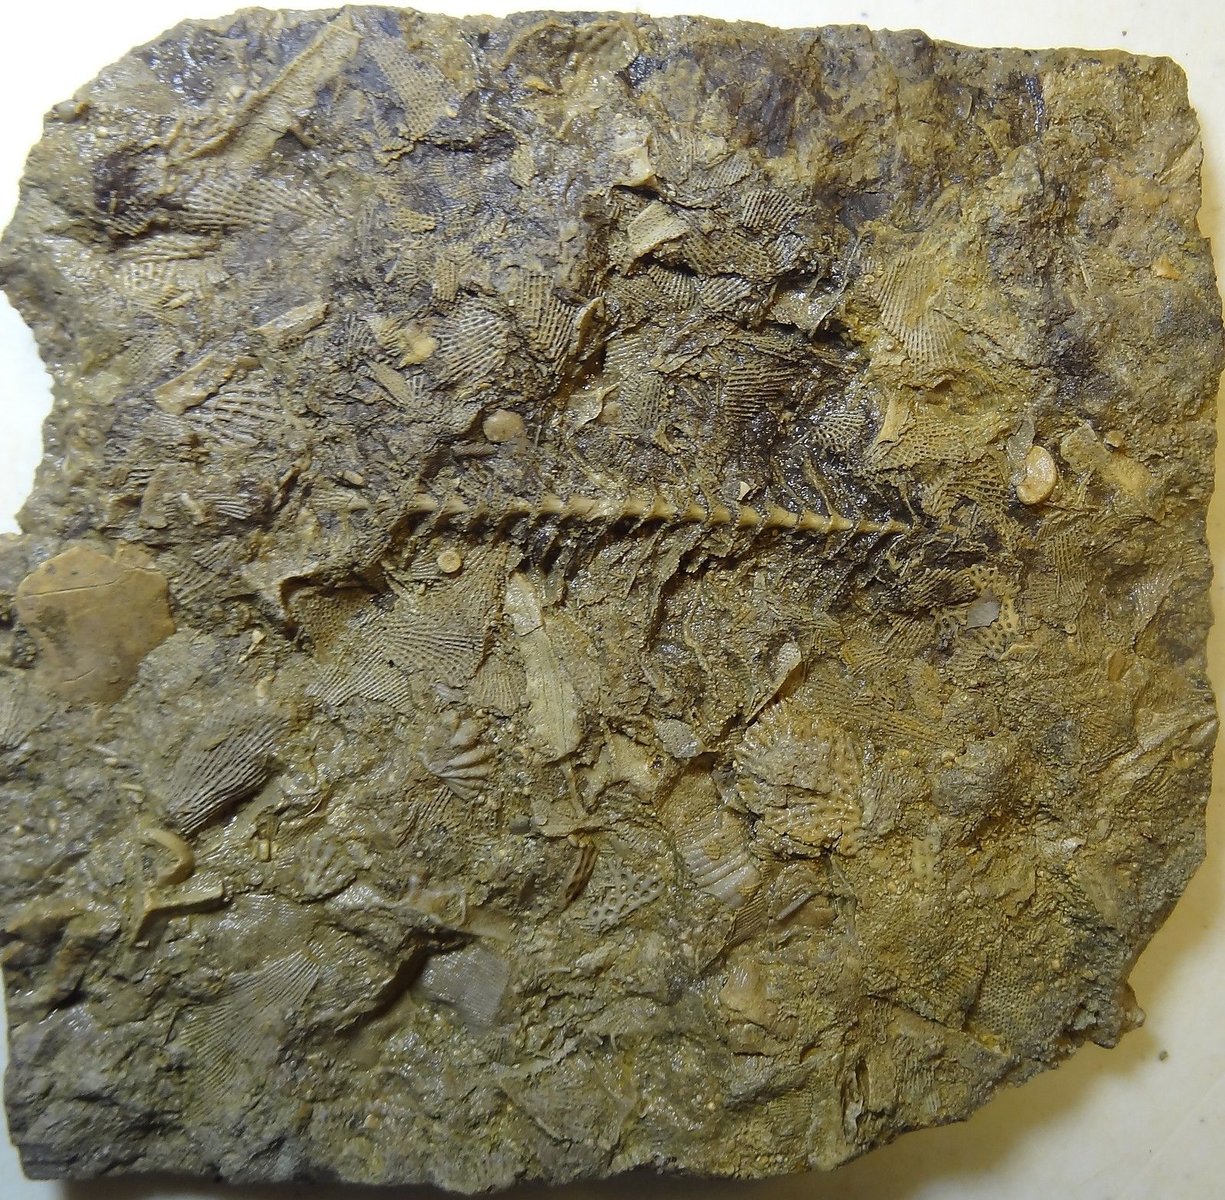 Bryozoans - Mississippian Period - Archimedes with Arms, in Matrix 1.jpg